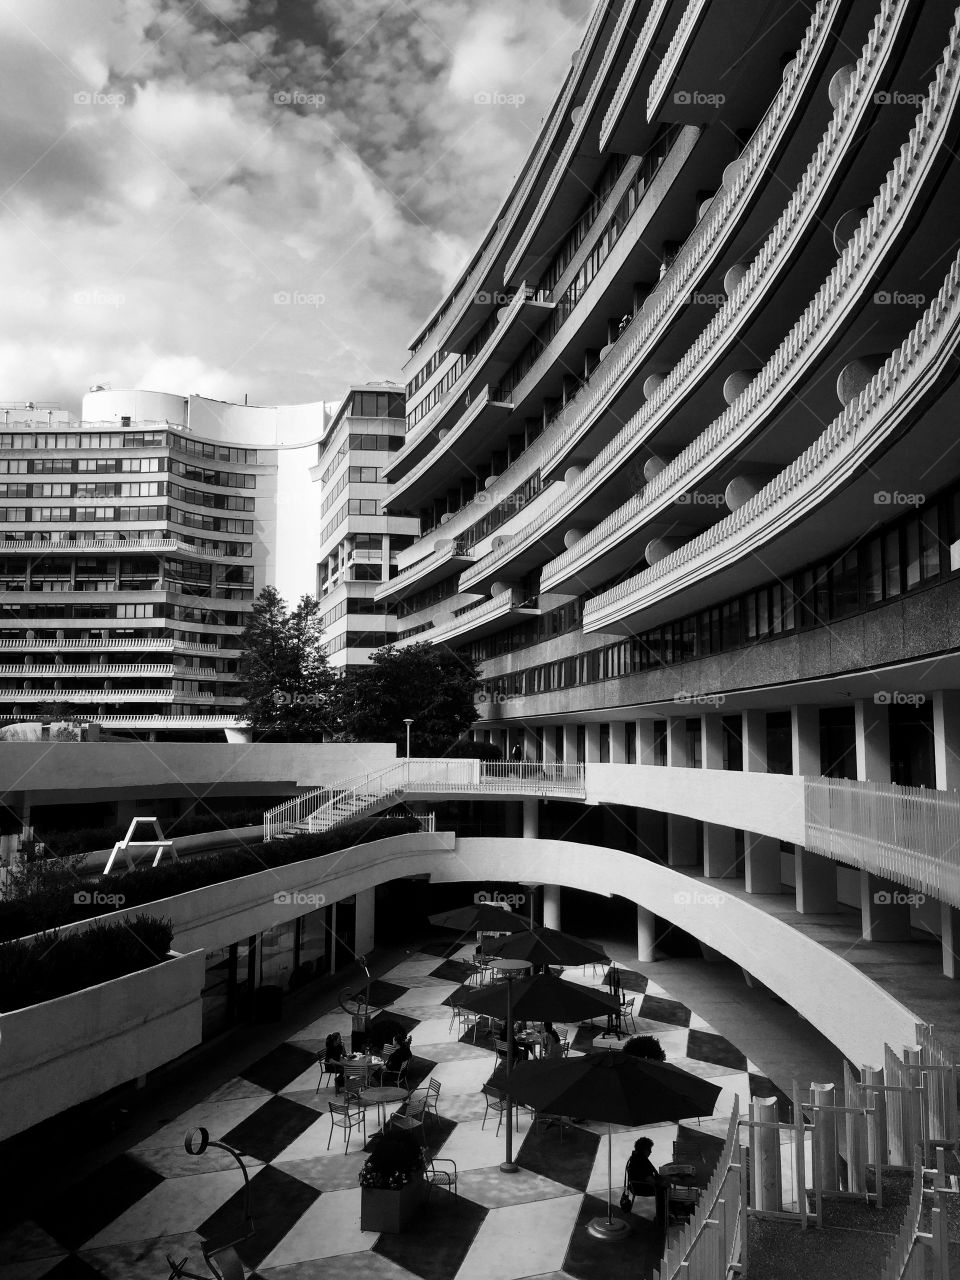 The Watergate in black and white